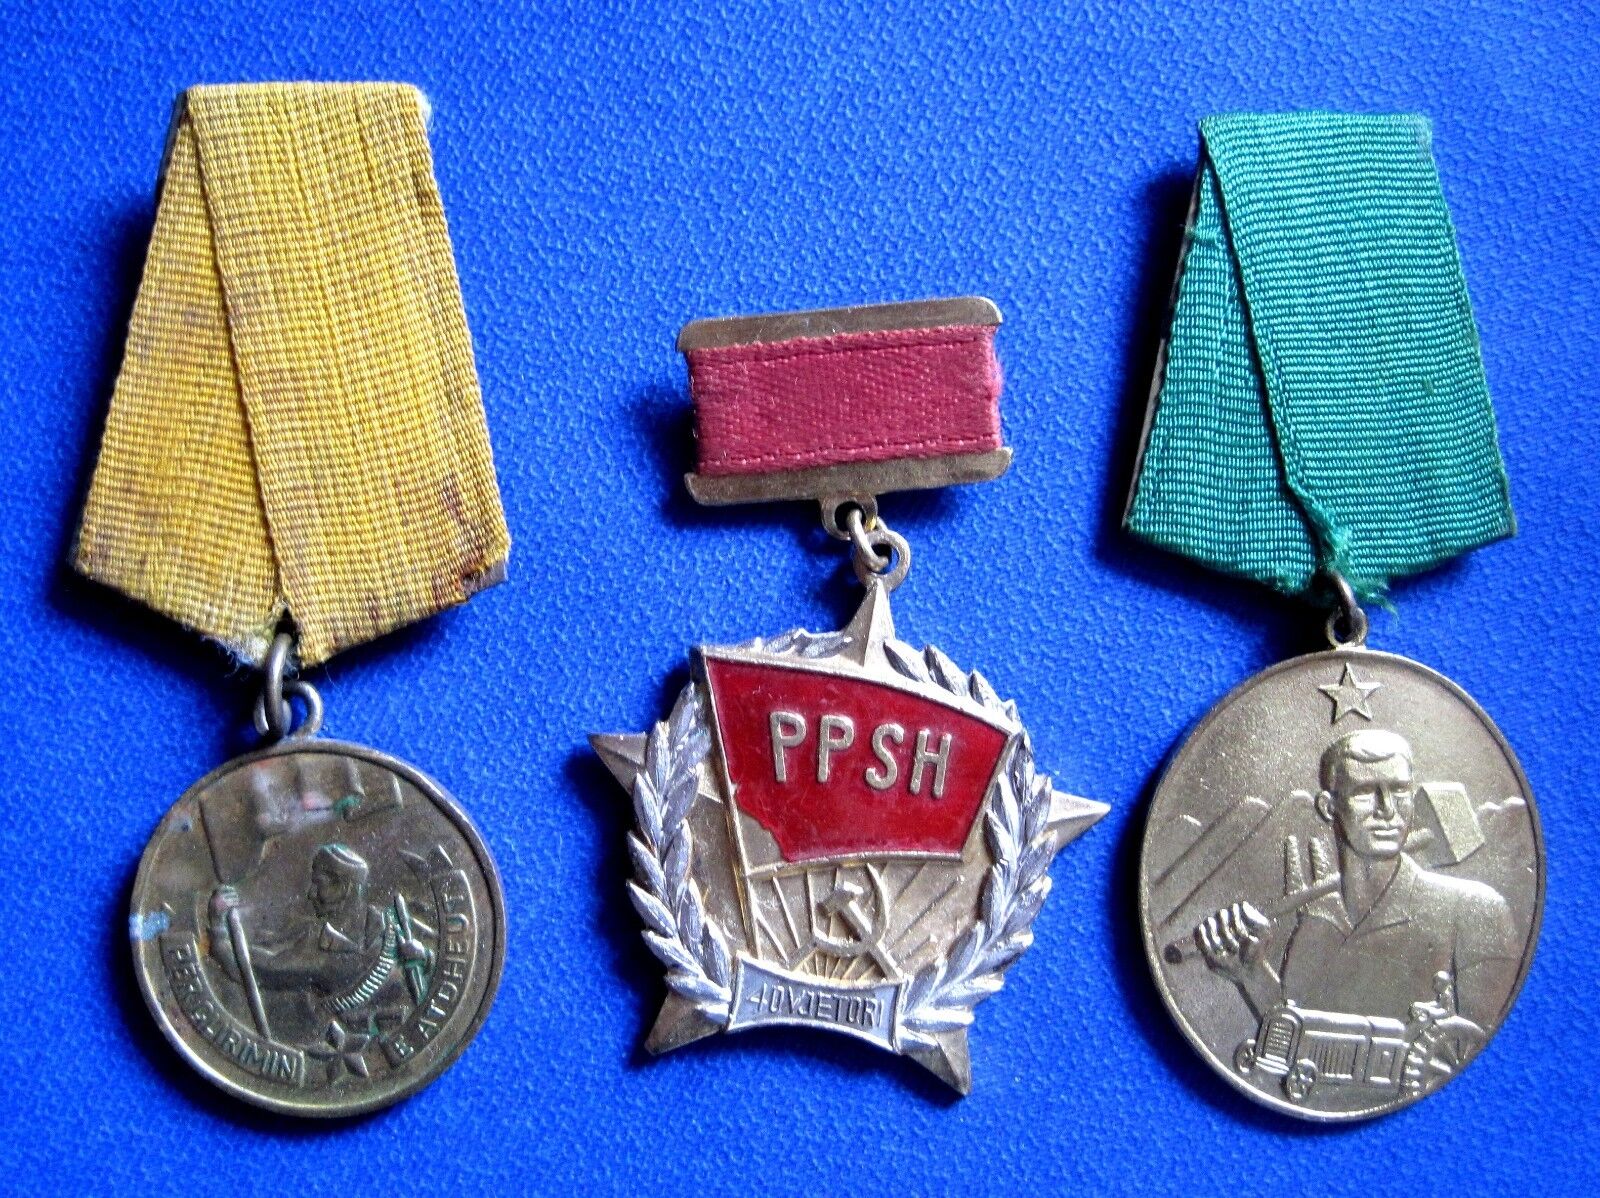 ALBANIA - MEDALS LABOUR MEDAL  Authentic MEDALS ORDER 40 ANNIVERSARY OF PPSH....